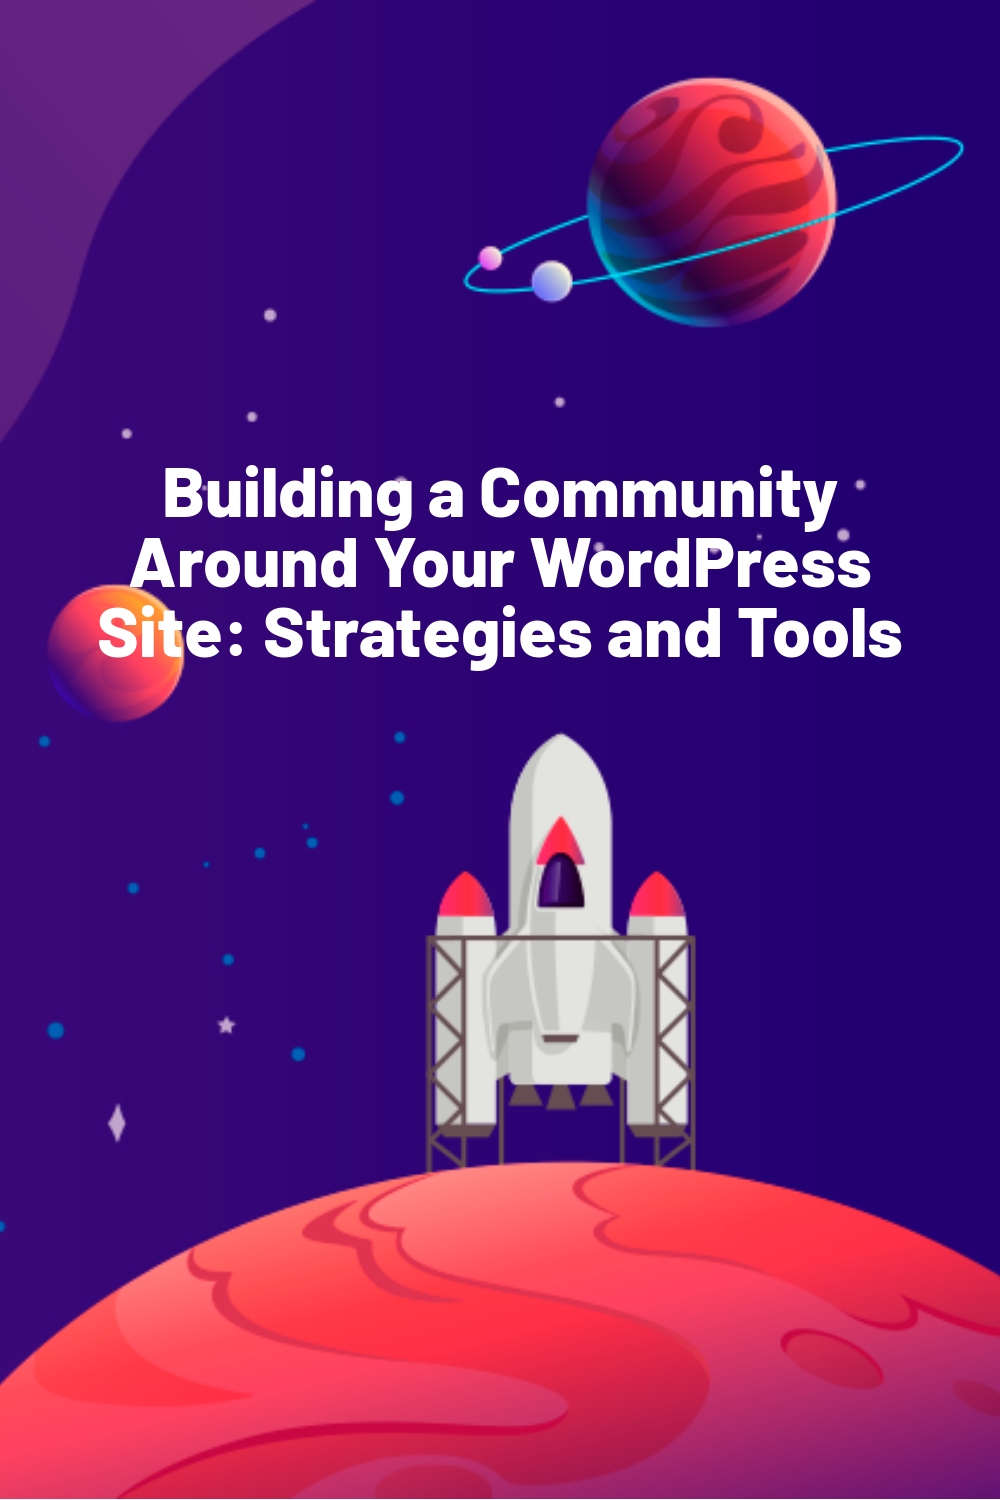 Building a Community Around Your WordPress Site: Strategies and Tools